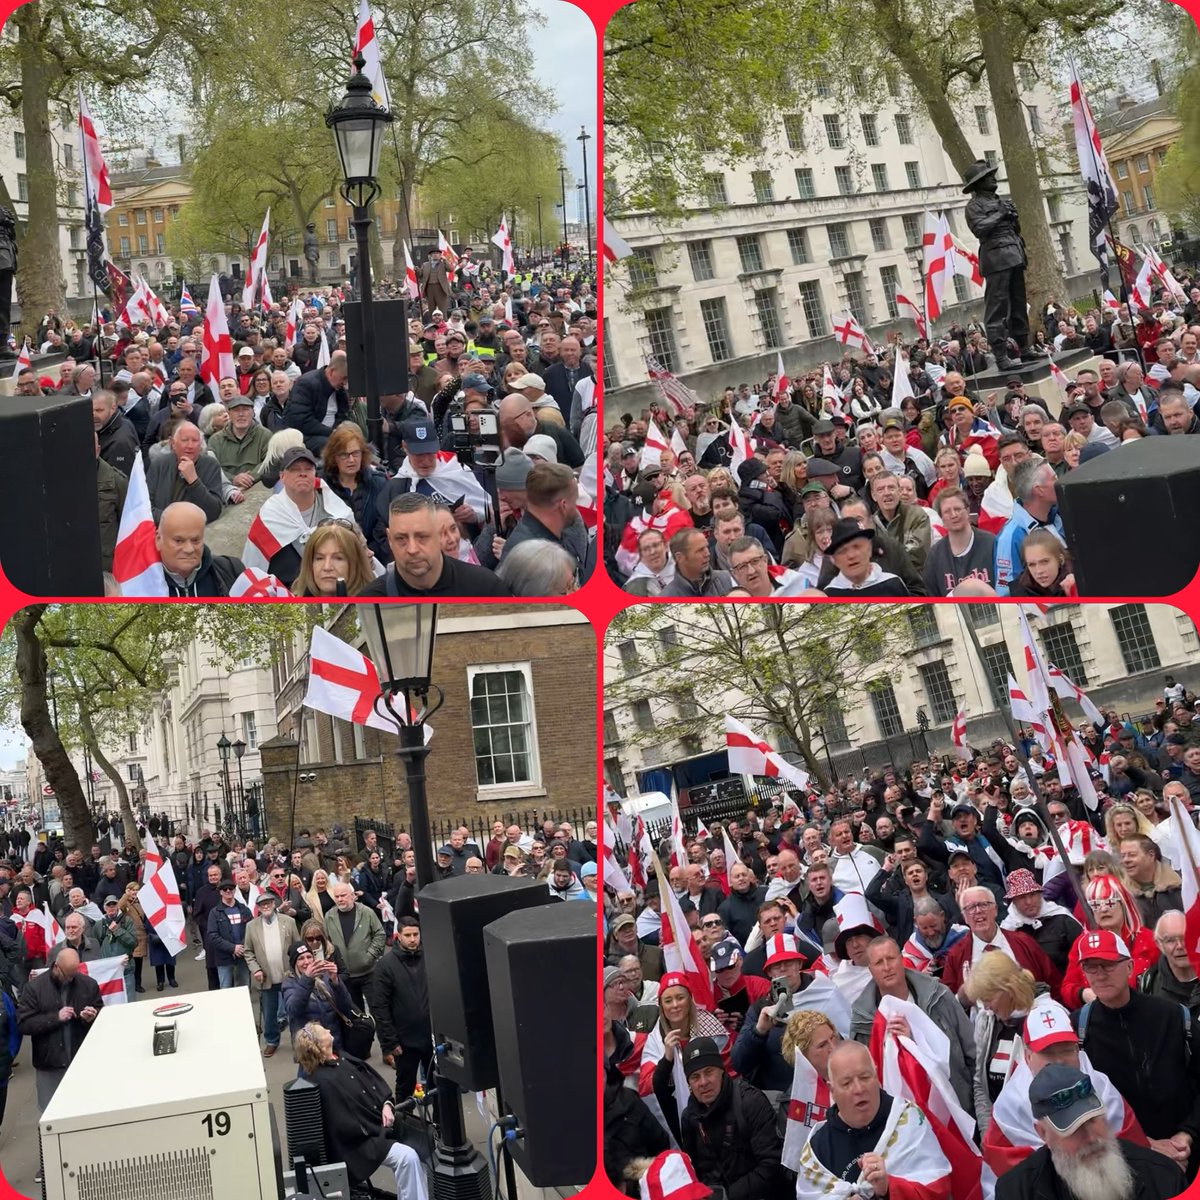 ❤️🏴󠁧󠁢󠁥󠁮󠁧󠁿 A big thank you to all who traveled to London yesterday; what a great day it was and the crowd was incredible. The pride we felt was truly beautiful. I know it was a Tuesday, and thousands would have loved to travel down, but I hope the live streams from yesterday gave you a…